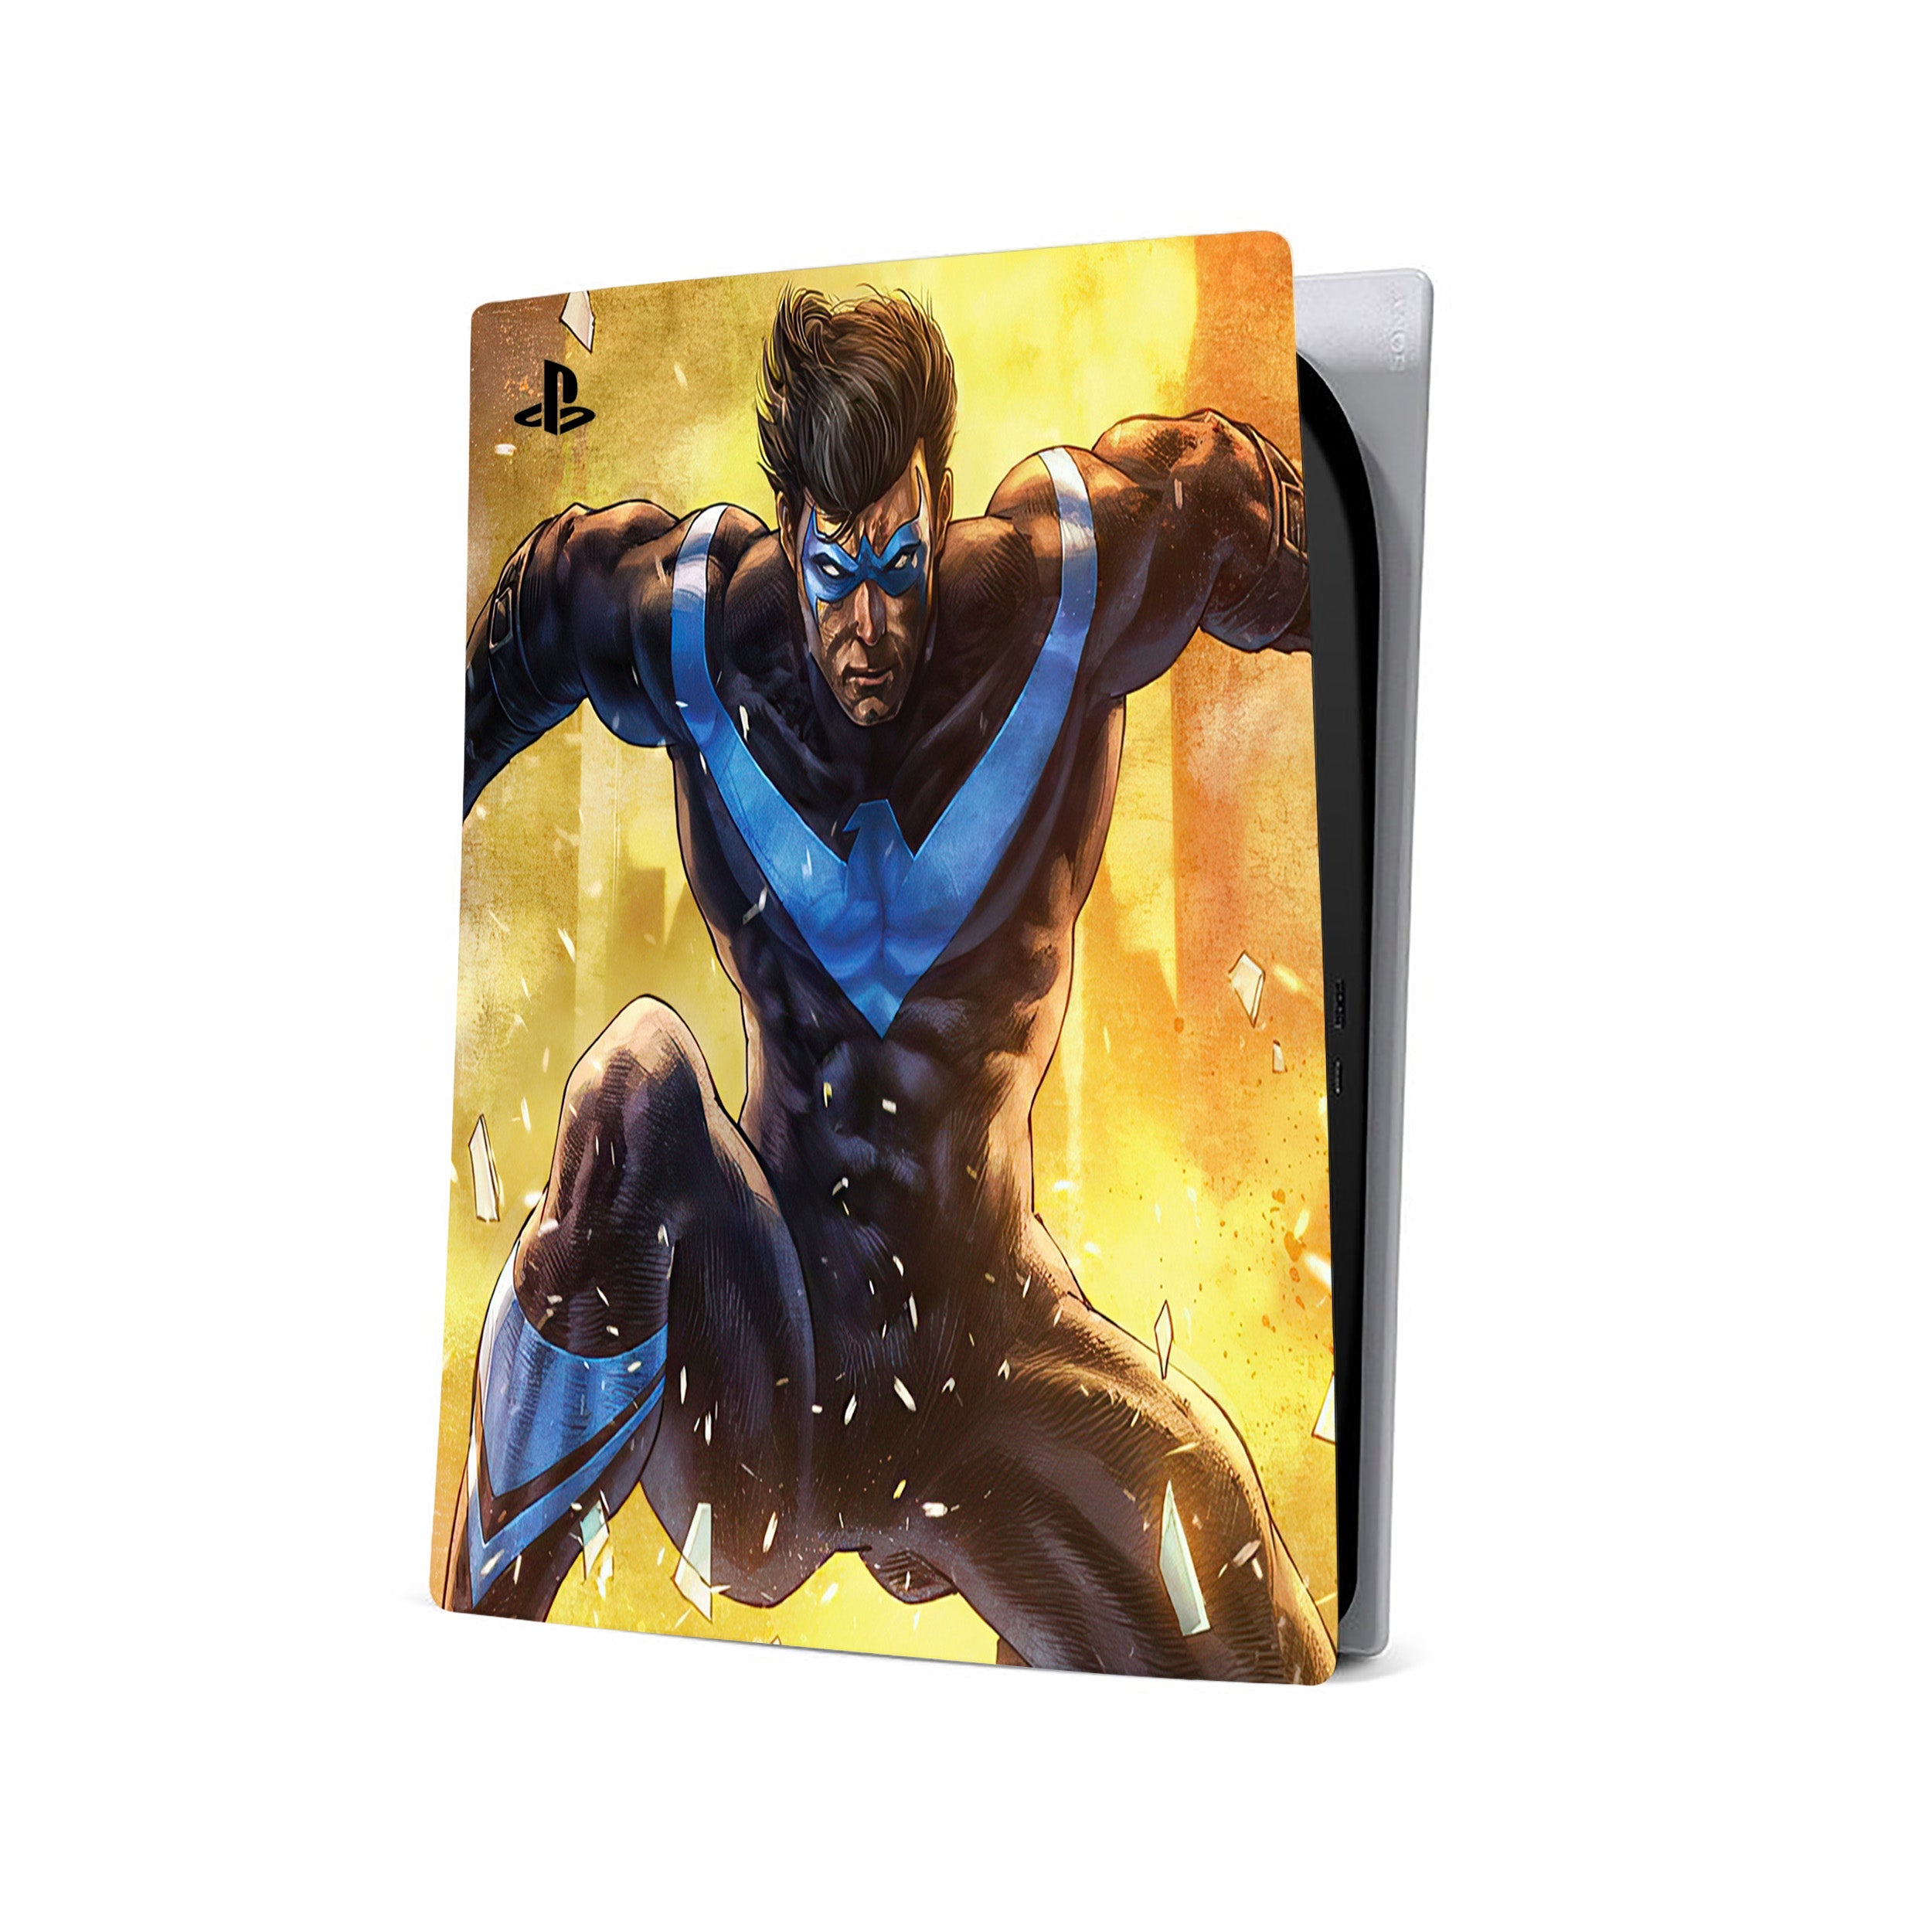 A video game skin featuring a DC Comics Nightwing design for the PS5.